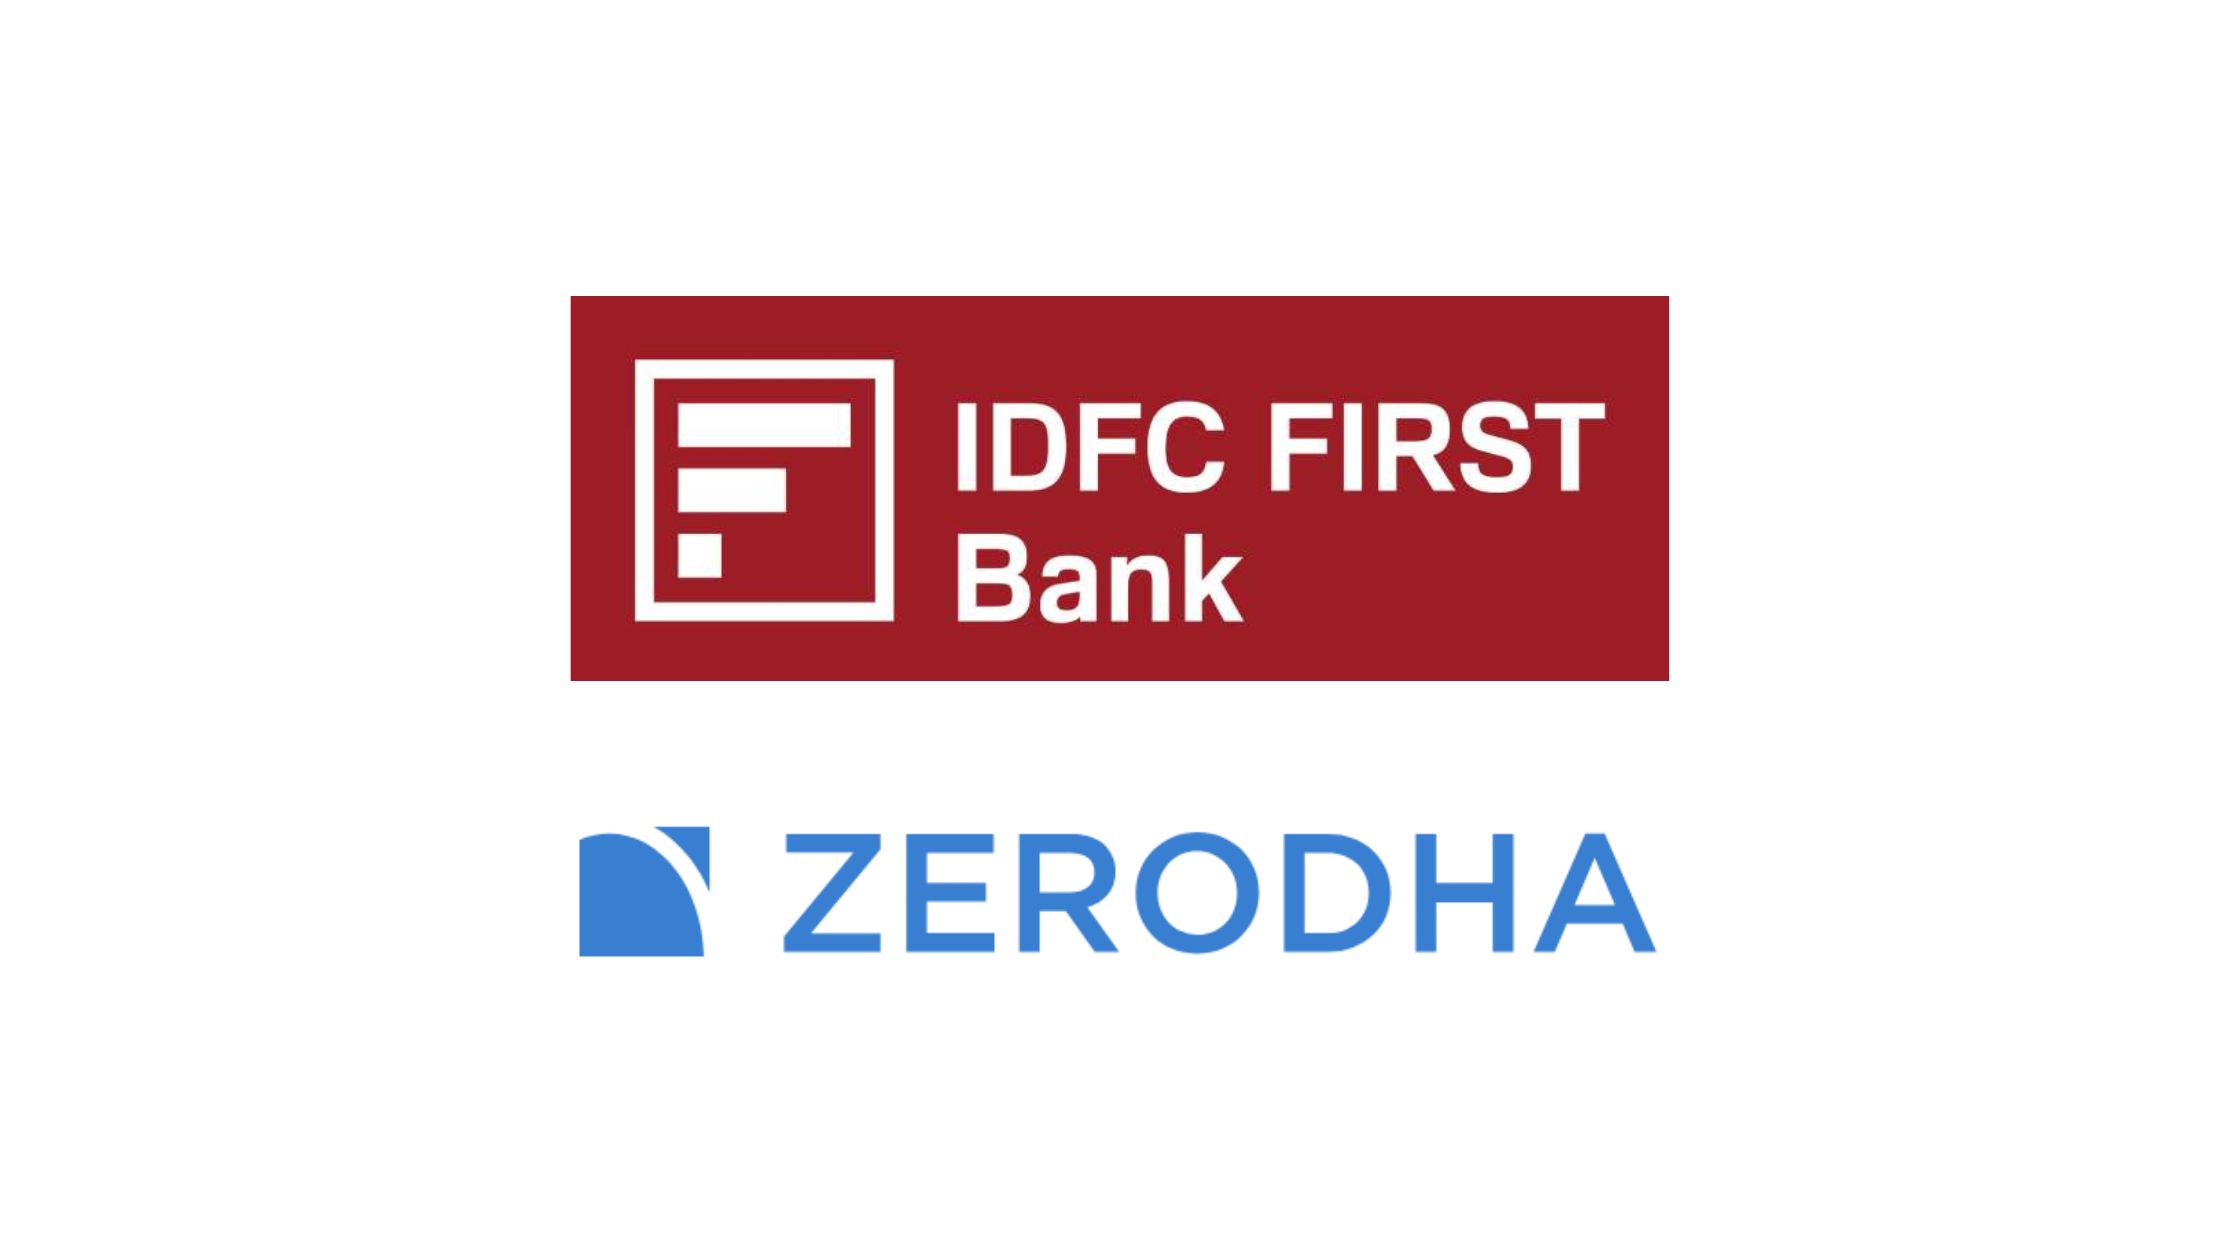 What is the Minimum Balance Requirement in Zerodha IDFC First Bank 3-in-1 Account